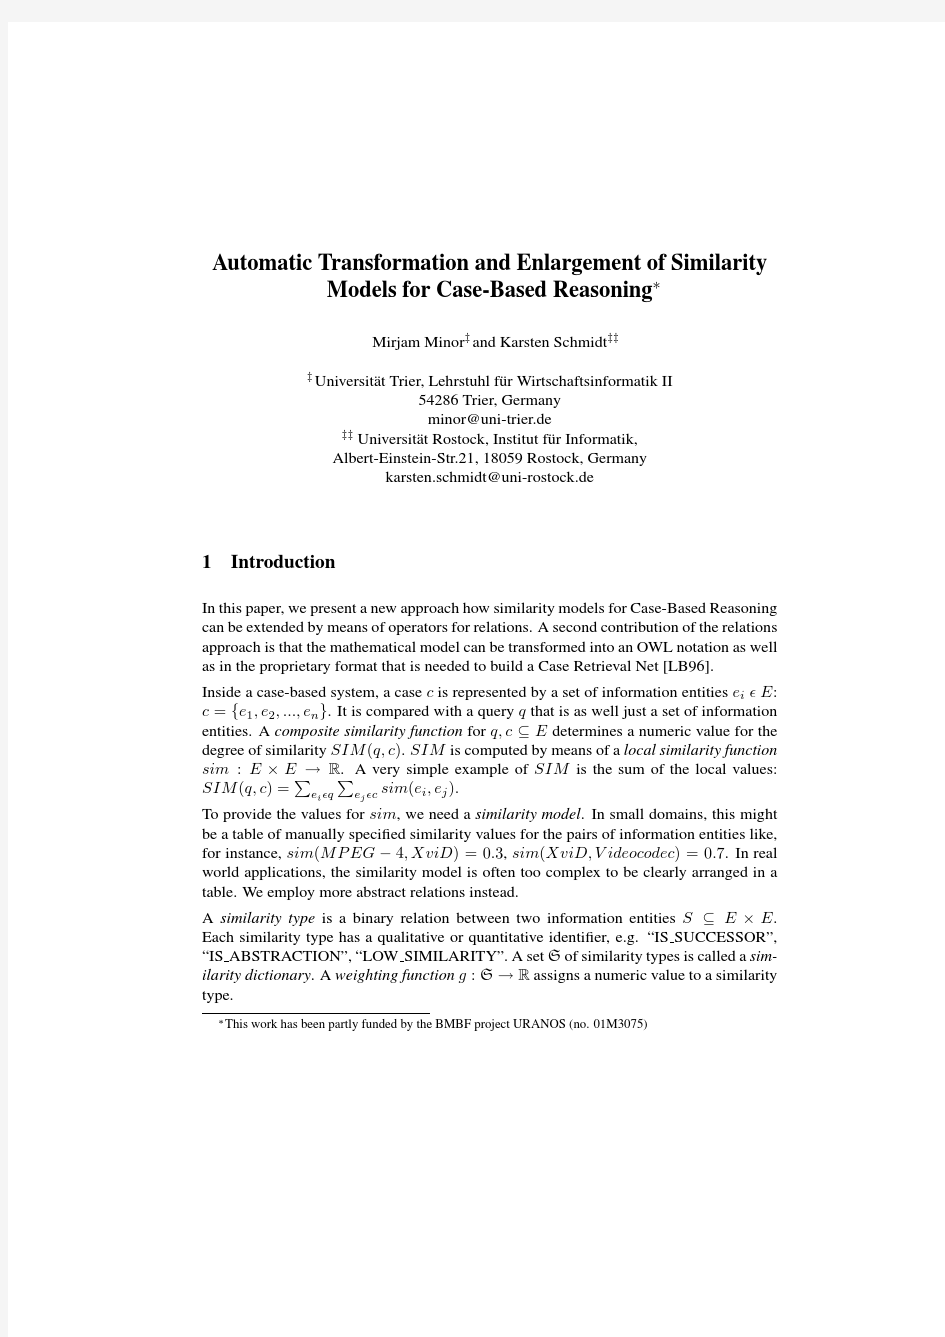 Automatic Transformation and Enlargement of Similarity Models for Case-Based Reasoning